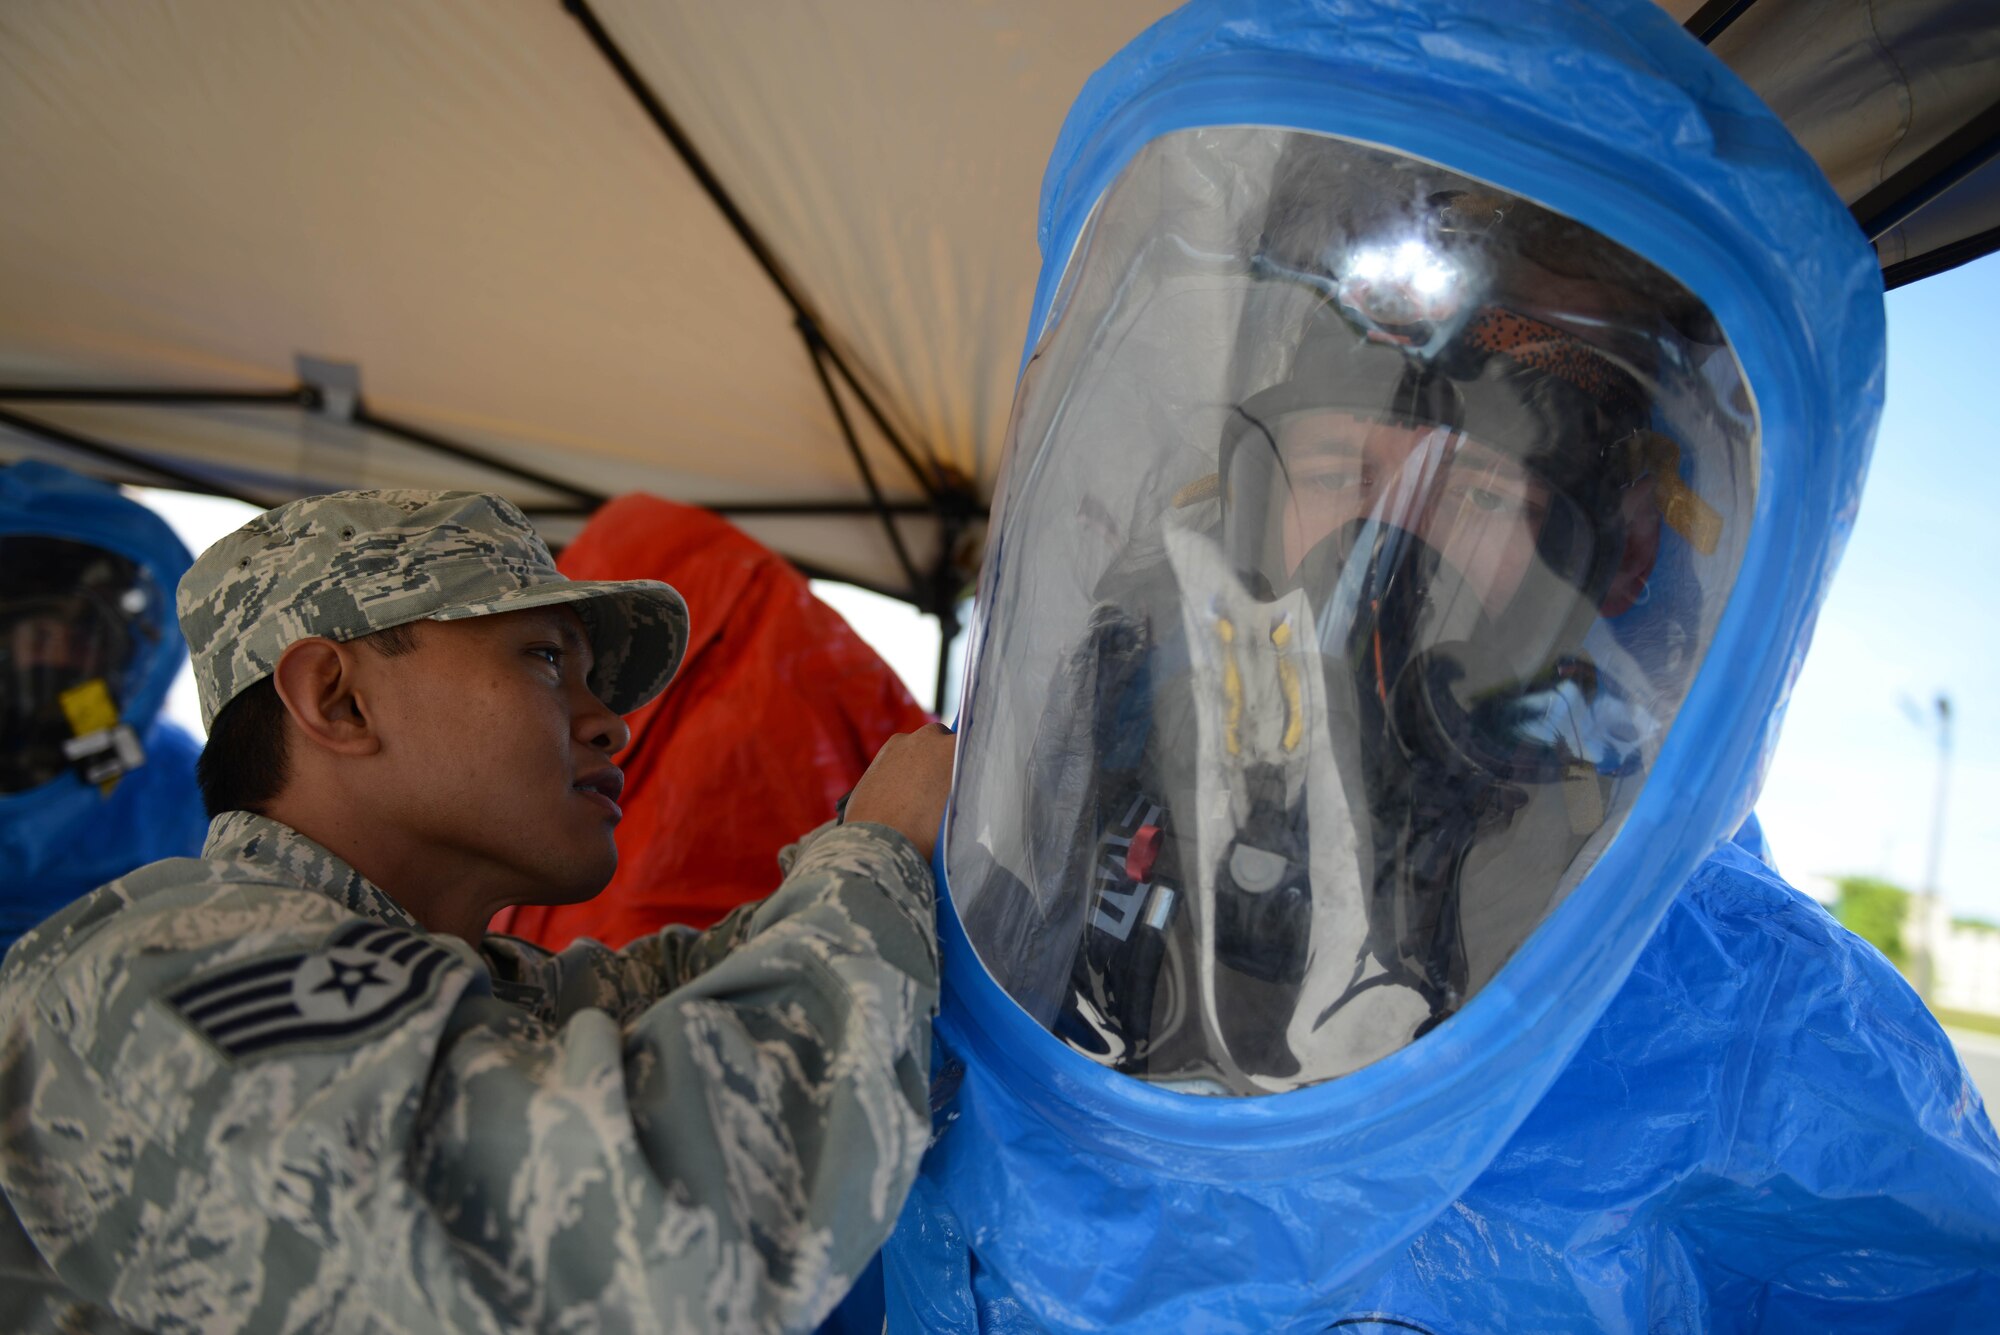 Airmen of the 673d Aerospace Medical Squadron don their hazardous material suits at the Talkeetna Theater during a Mission Assurance Exercise, June 1, 2017. The exercise tested the installation’s capabilities in dealing with a simulated anthrax attack.